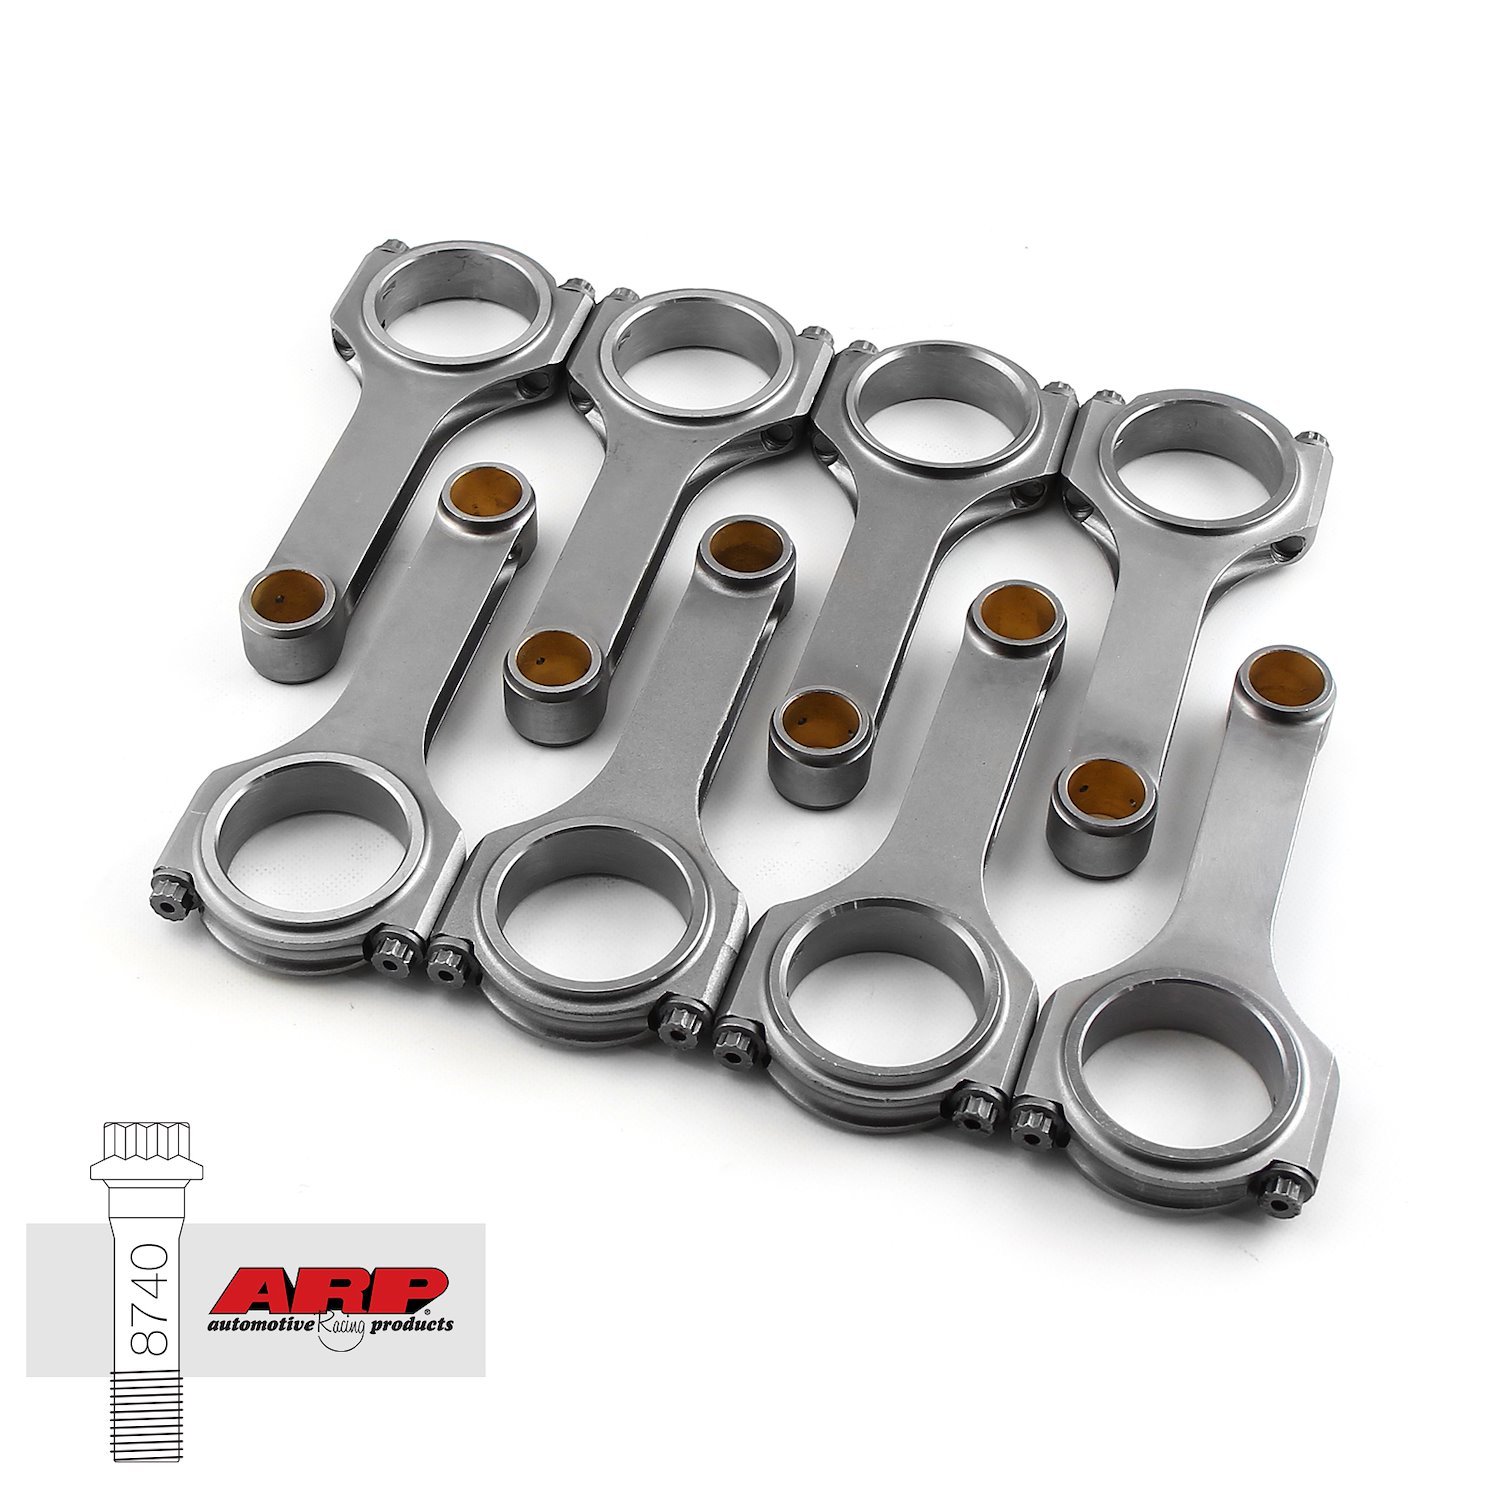 H BEAM 5.090 2.123 .912 4340 CONNECTING RODS FORD 302 WINDSOR W/ ARP 8740